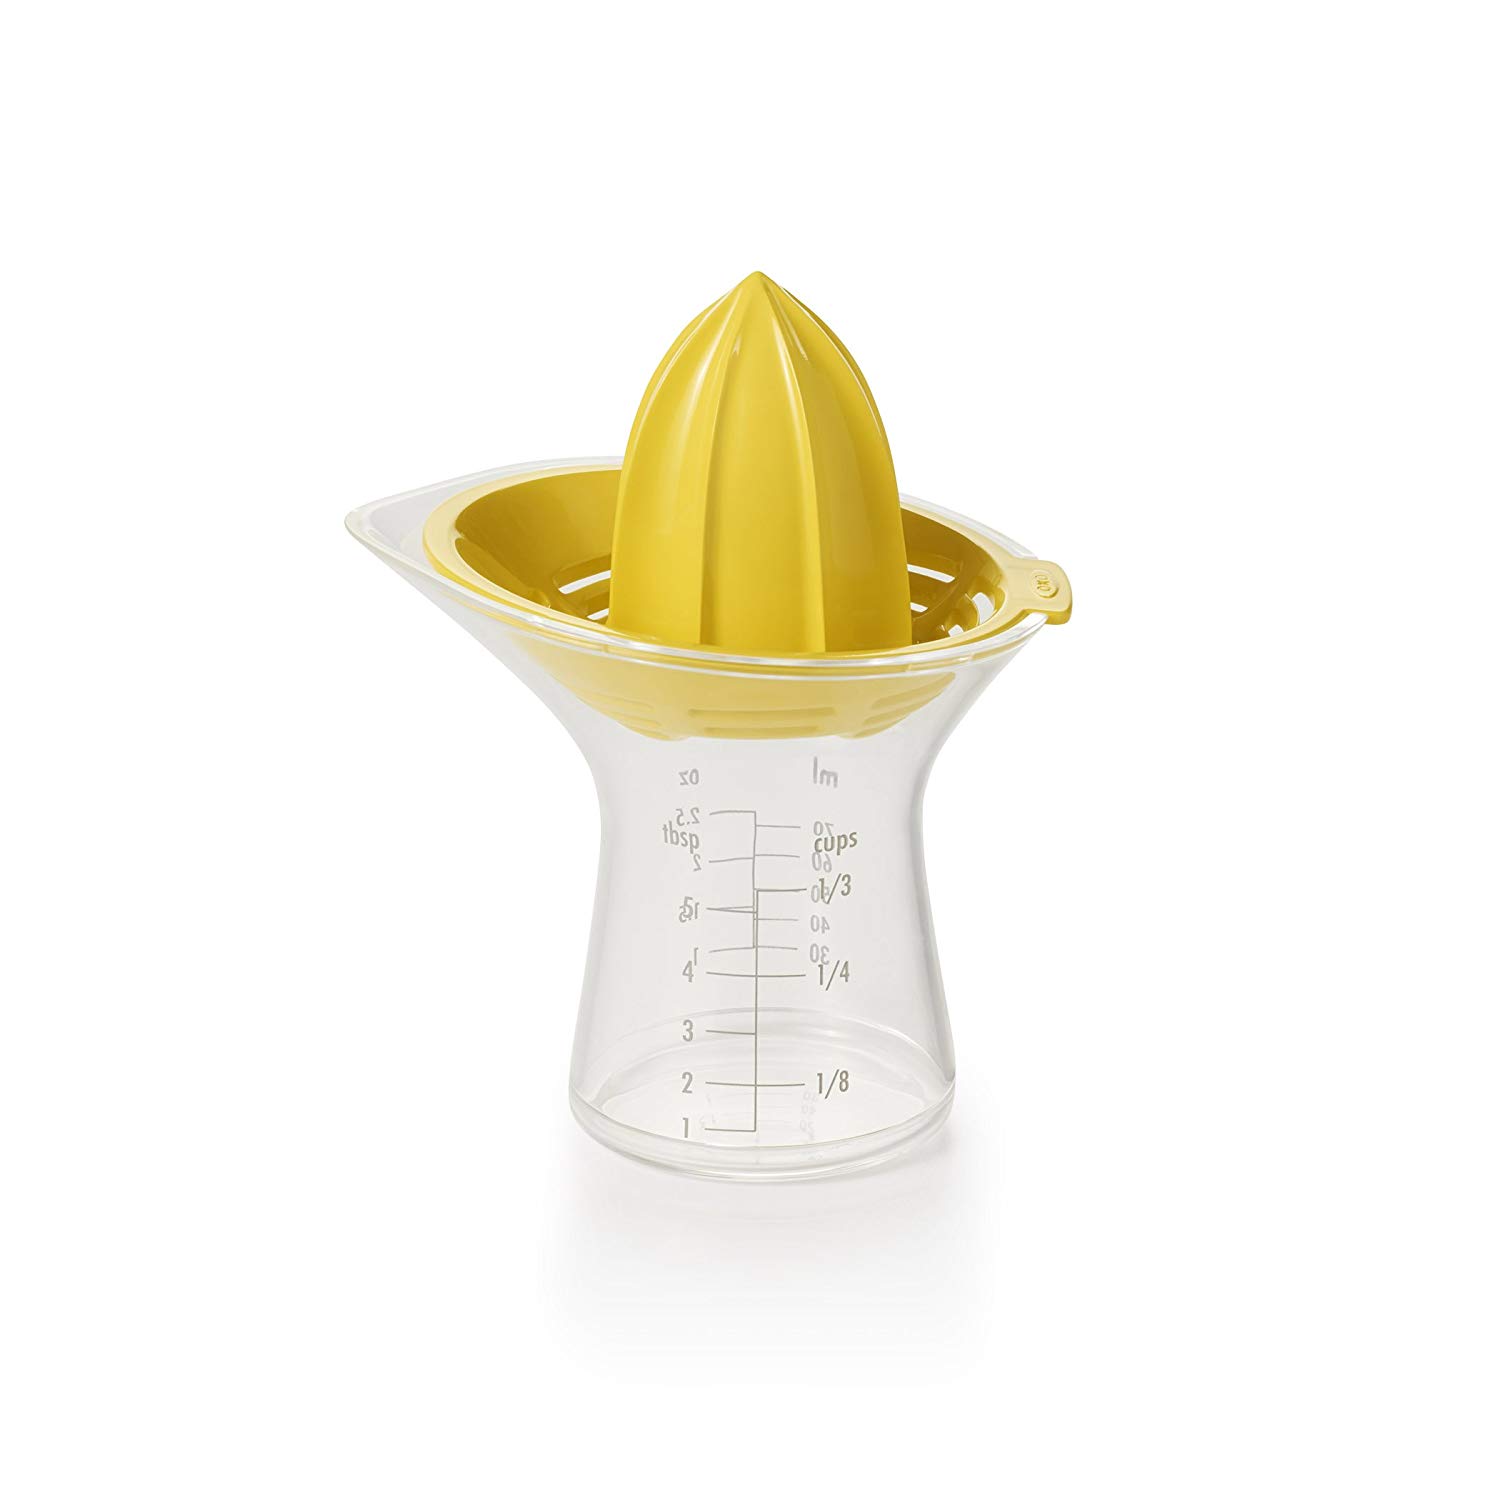 OXO Good Grips Small Citrus Juicer with Built In Measuring Cup and Strainer